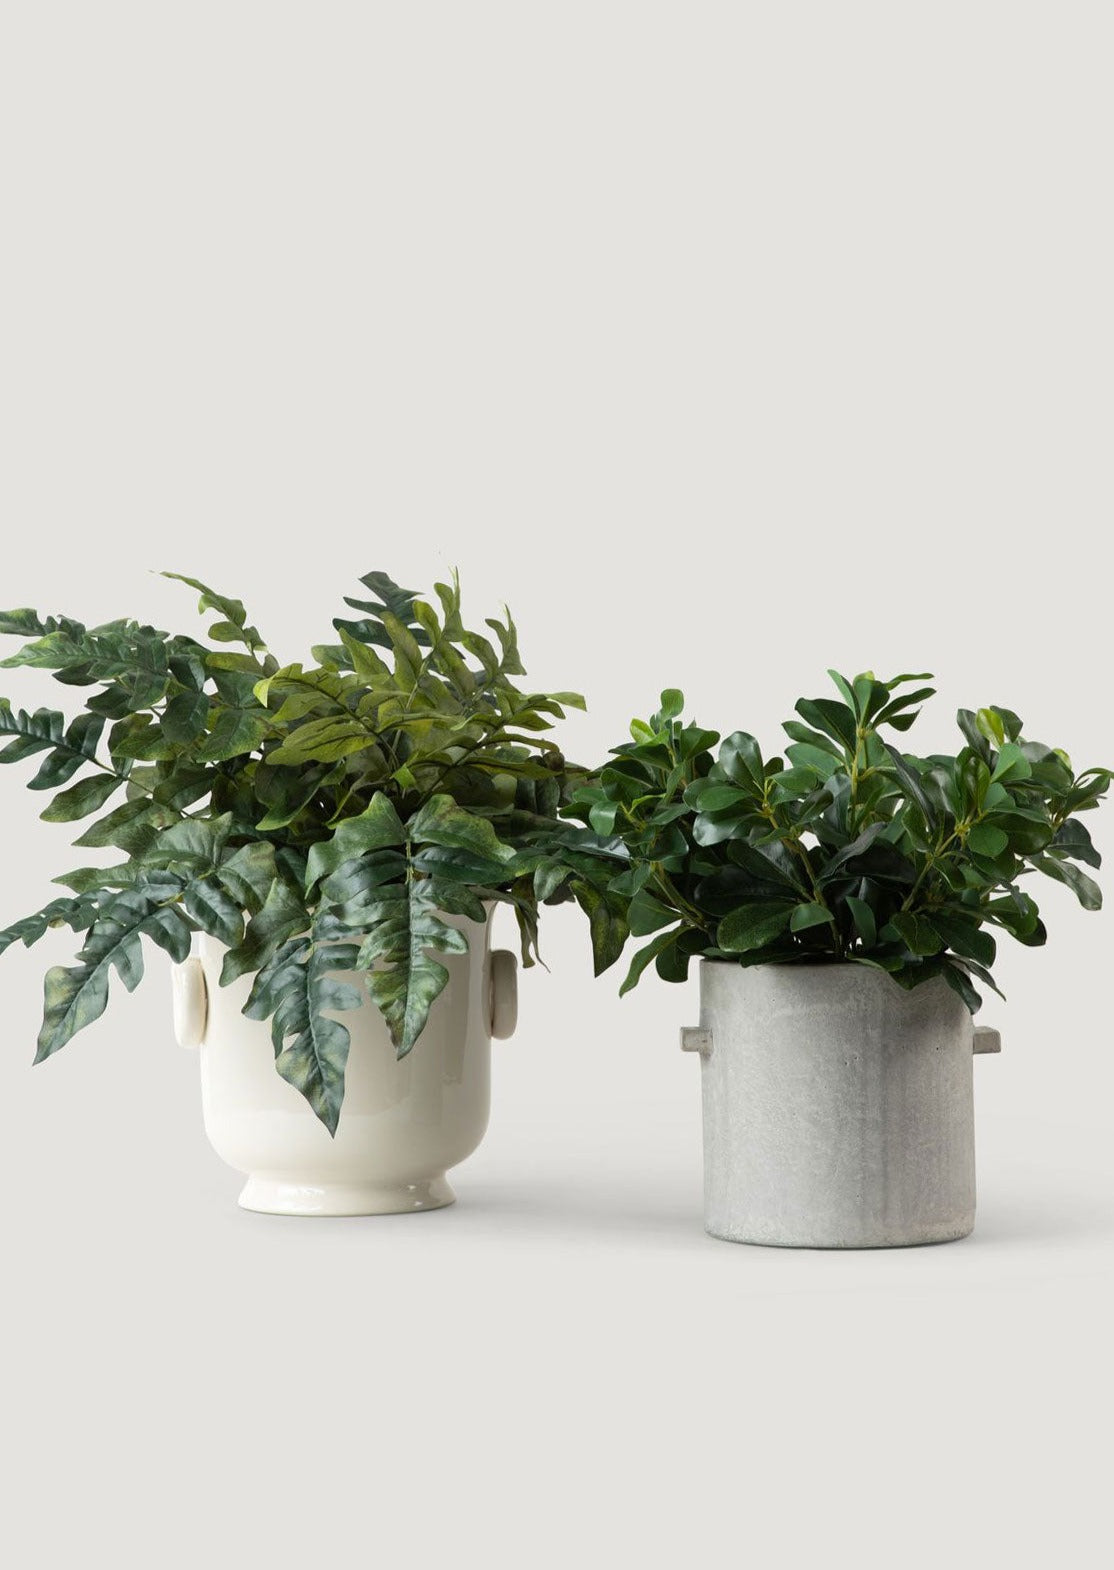 Faux Royal Fern Plant in Cream Cache Pot Next to Wax Privet Plant